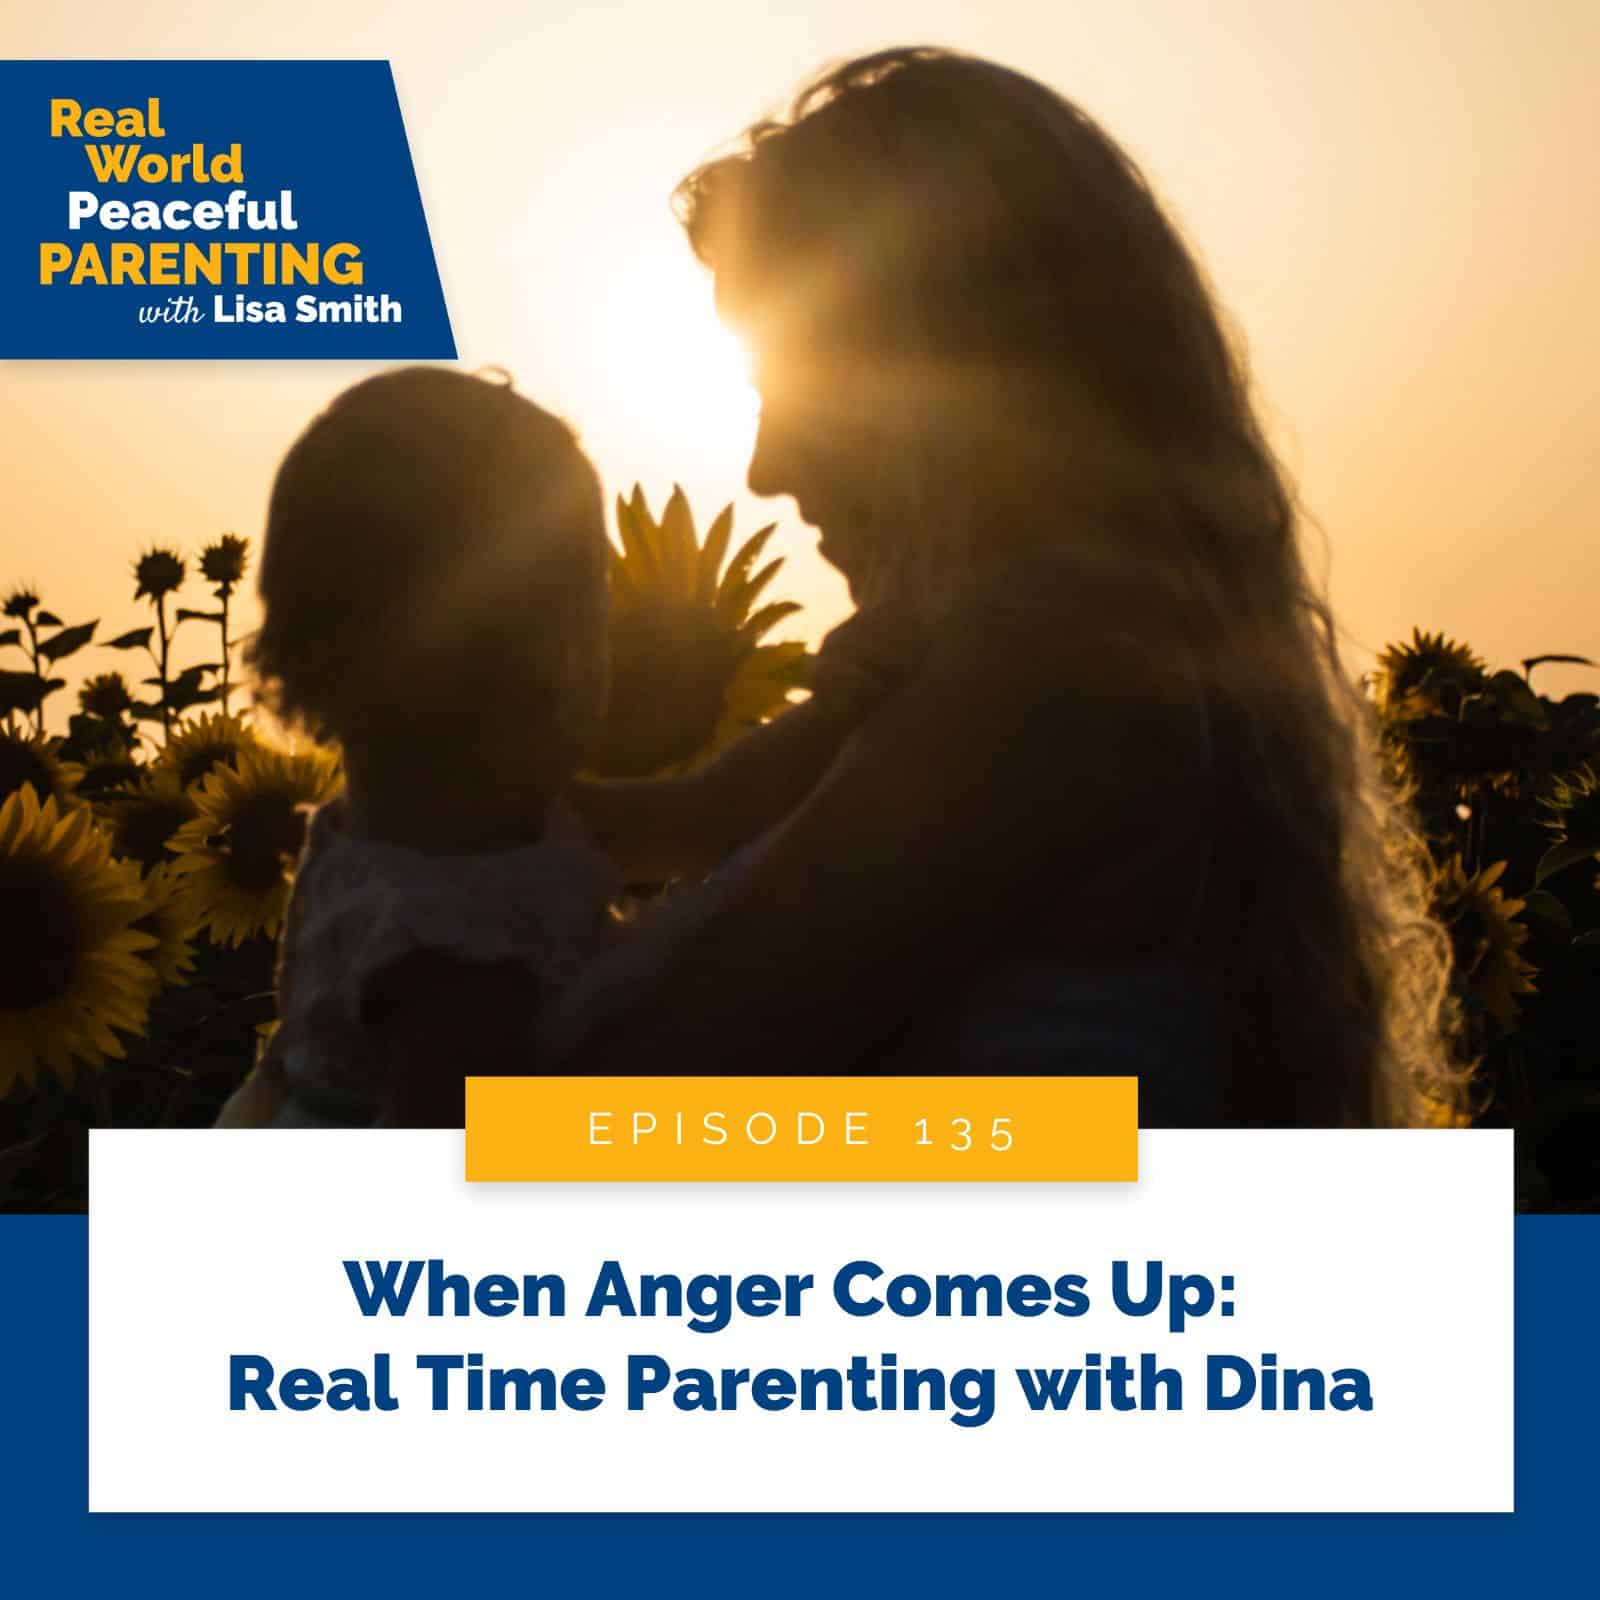 Real World Peaceful Parenting Lisa Smith | When Anger Comes Up: Real Time Parenting with Dina